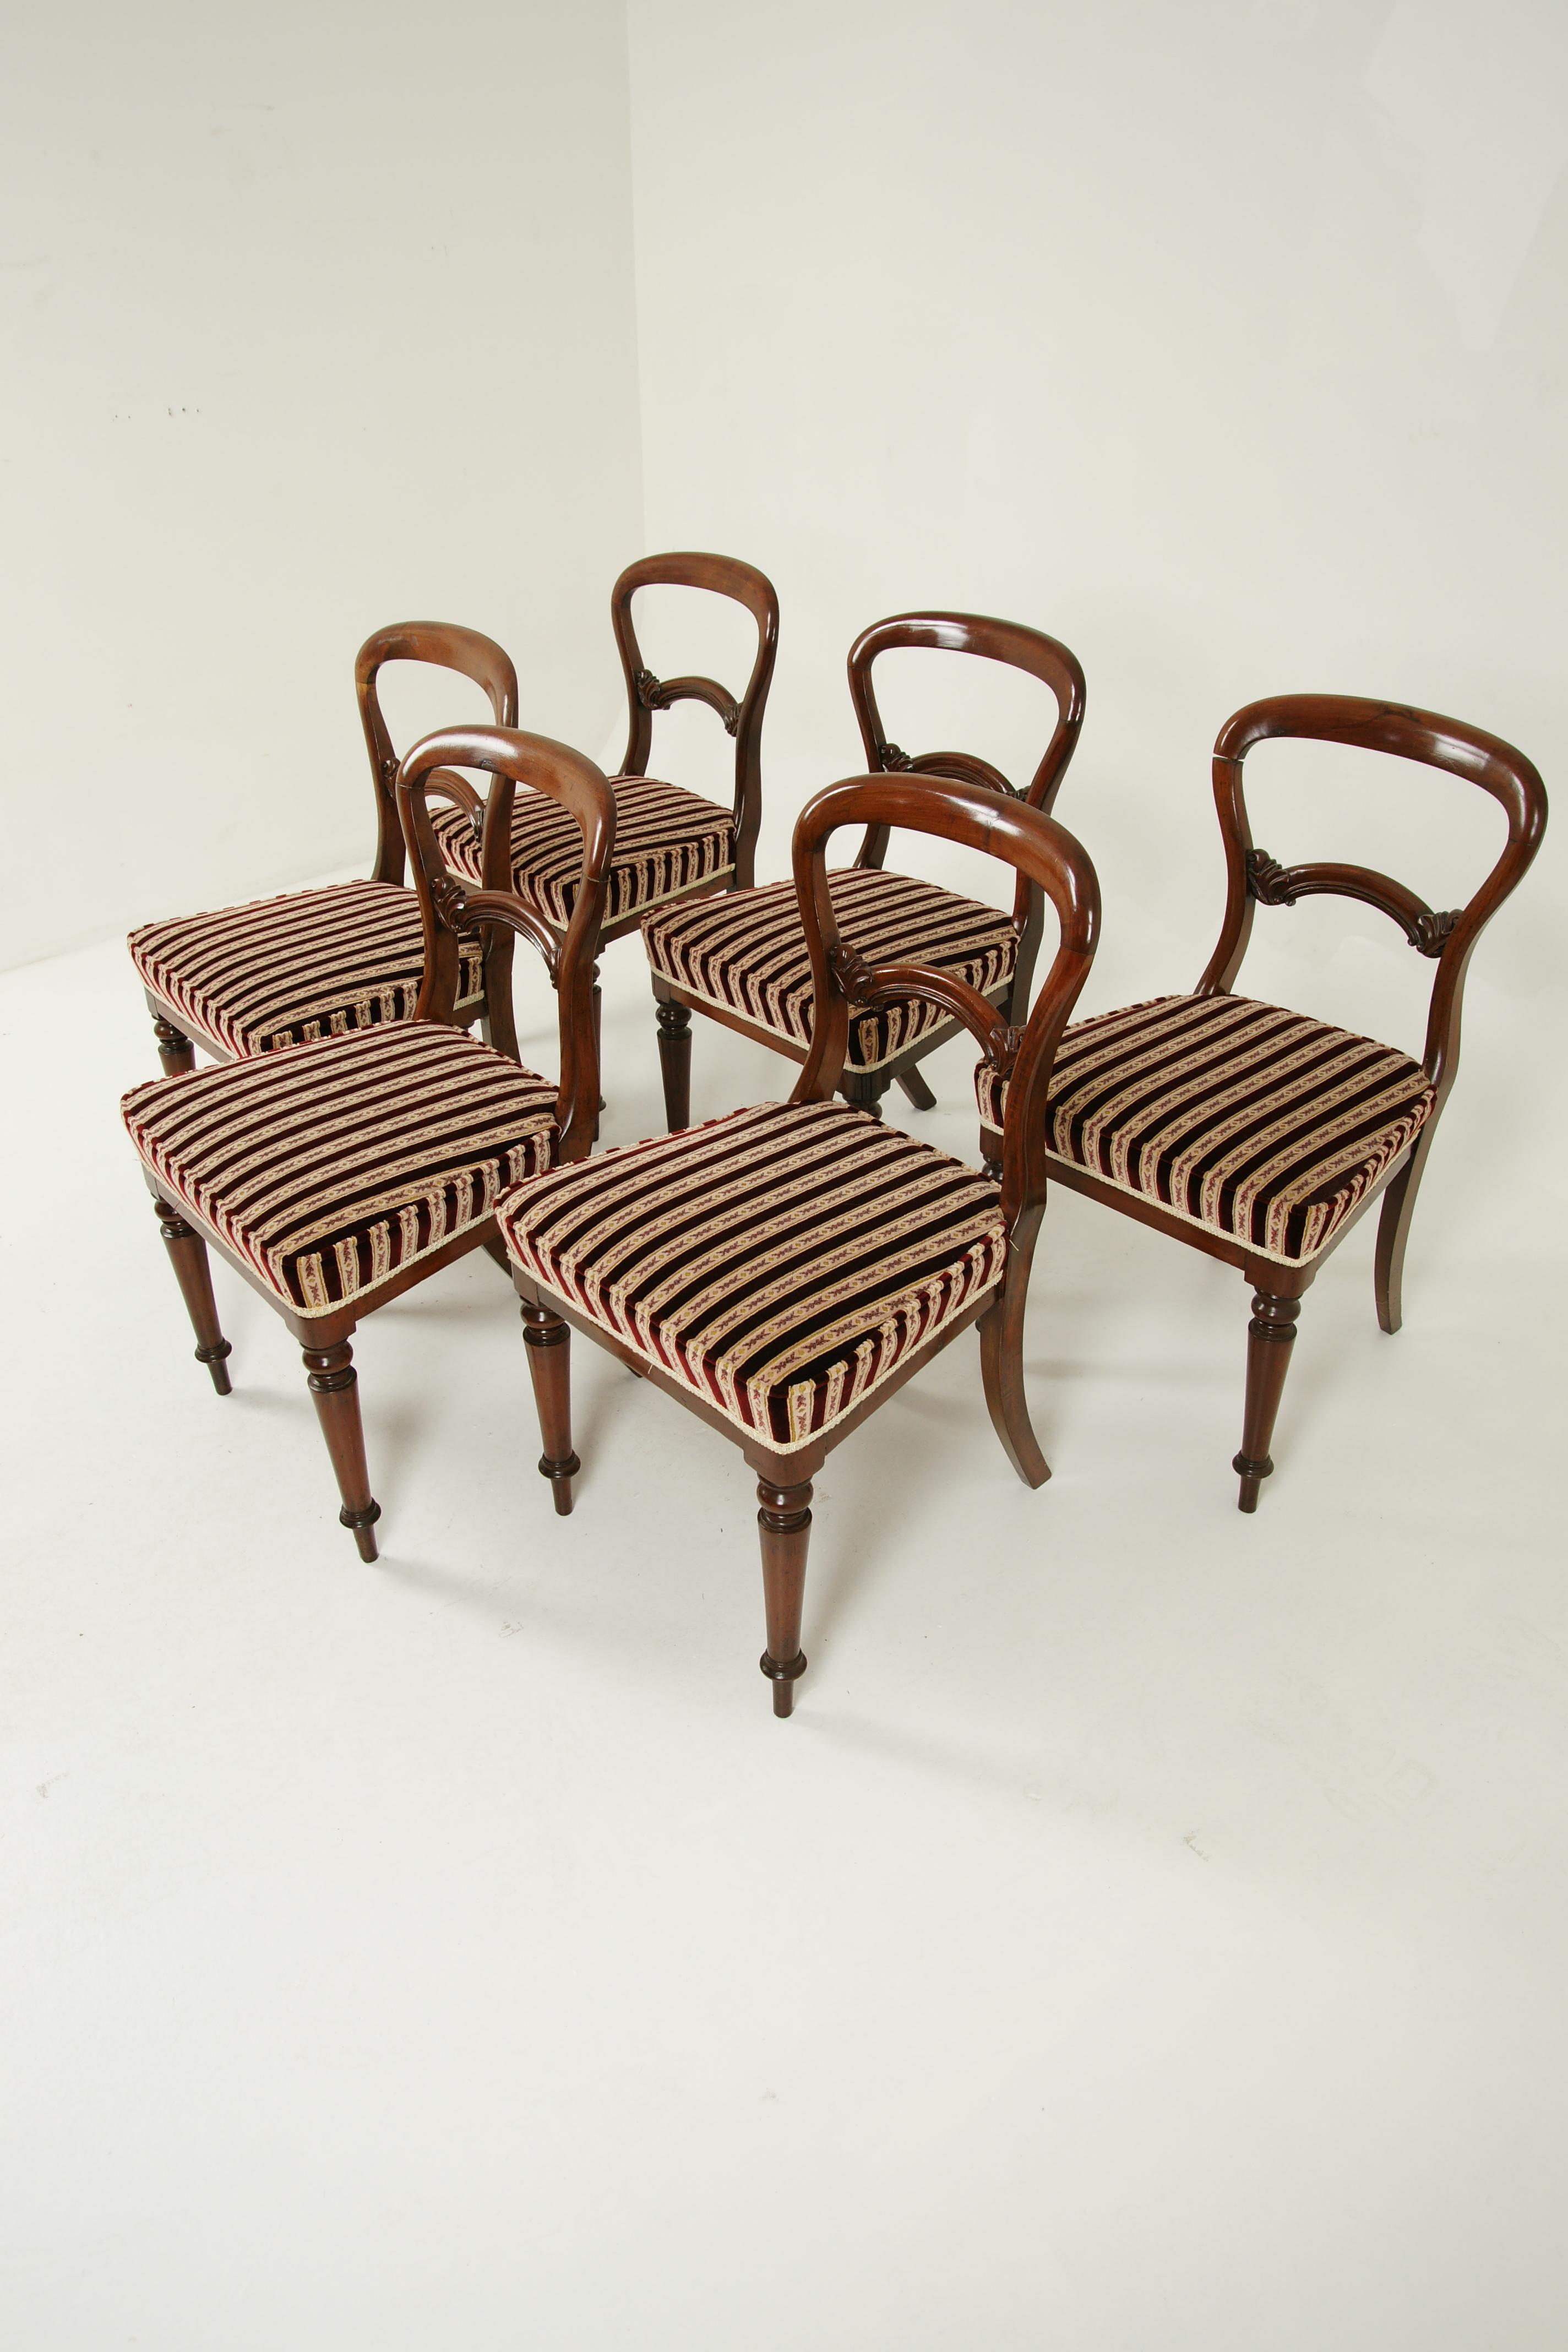 Hand-Crafted Antique Dining Chairs, 6 Balloon Back Chairs, Walnut, Victorian, 1880, B1573